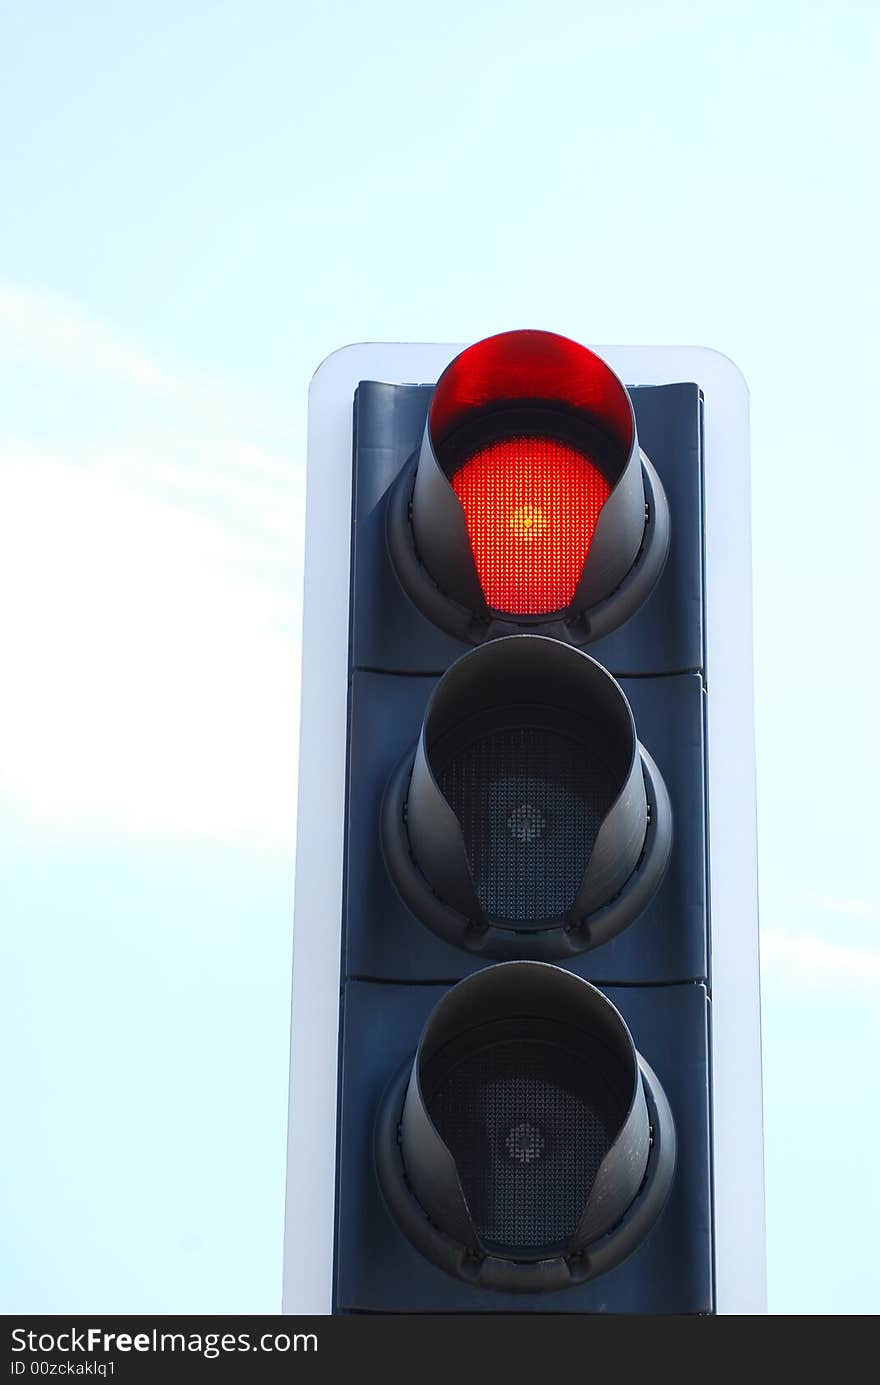 Red traffic light signal against cloudy blue sky. Red traffic light signal against cloudy blue sky